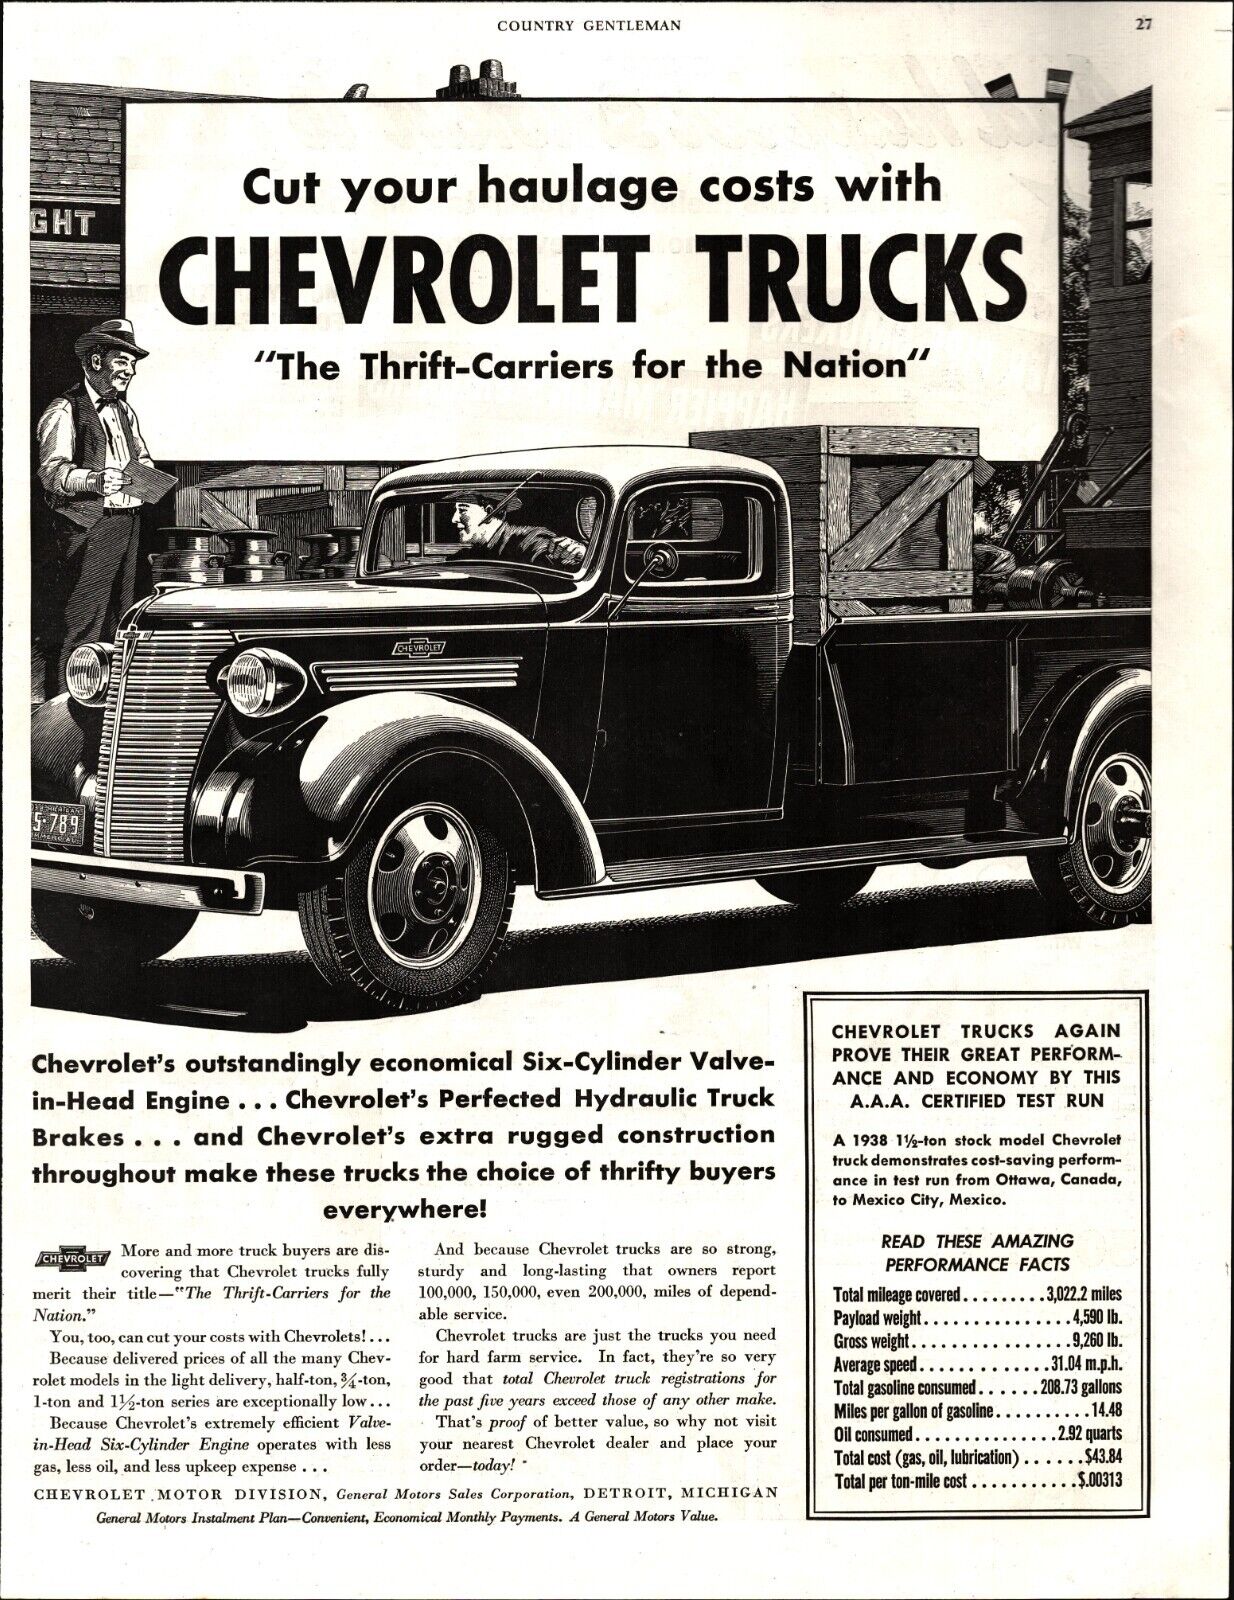 VINTAGE 1938 CHEVROLET TRUCK AD cut your haulage cost  PRINT AD b9